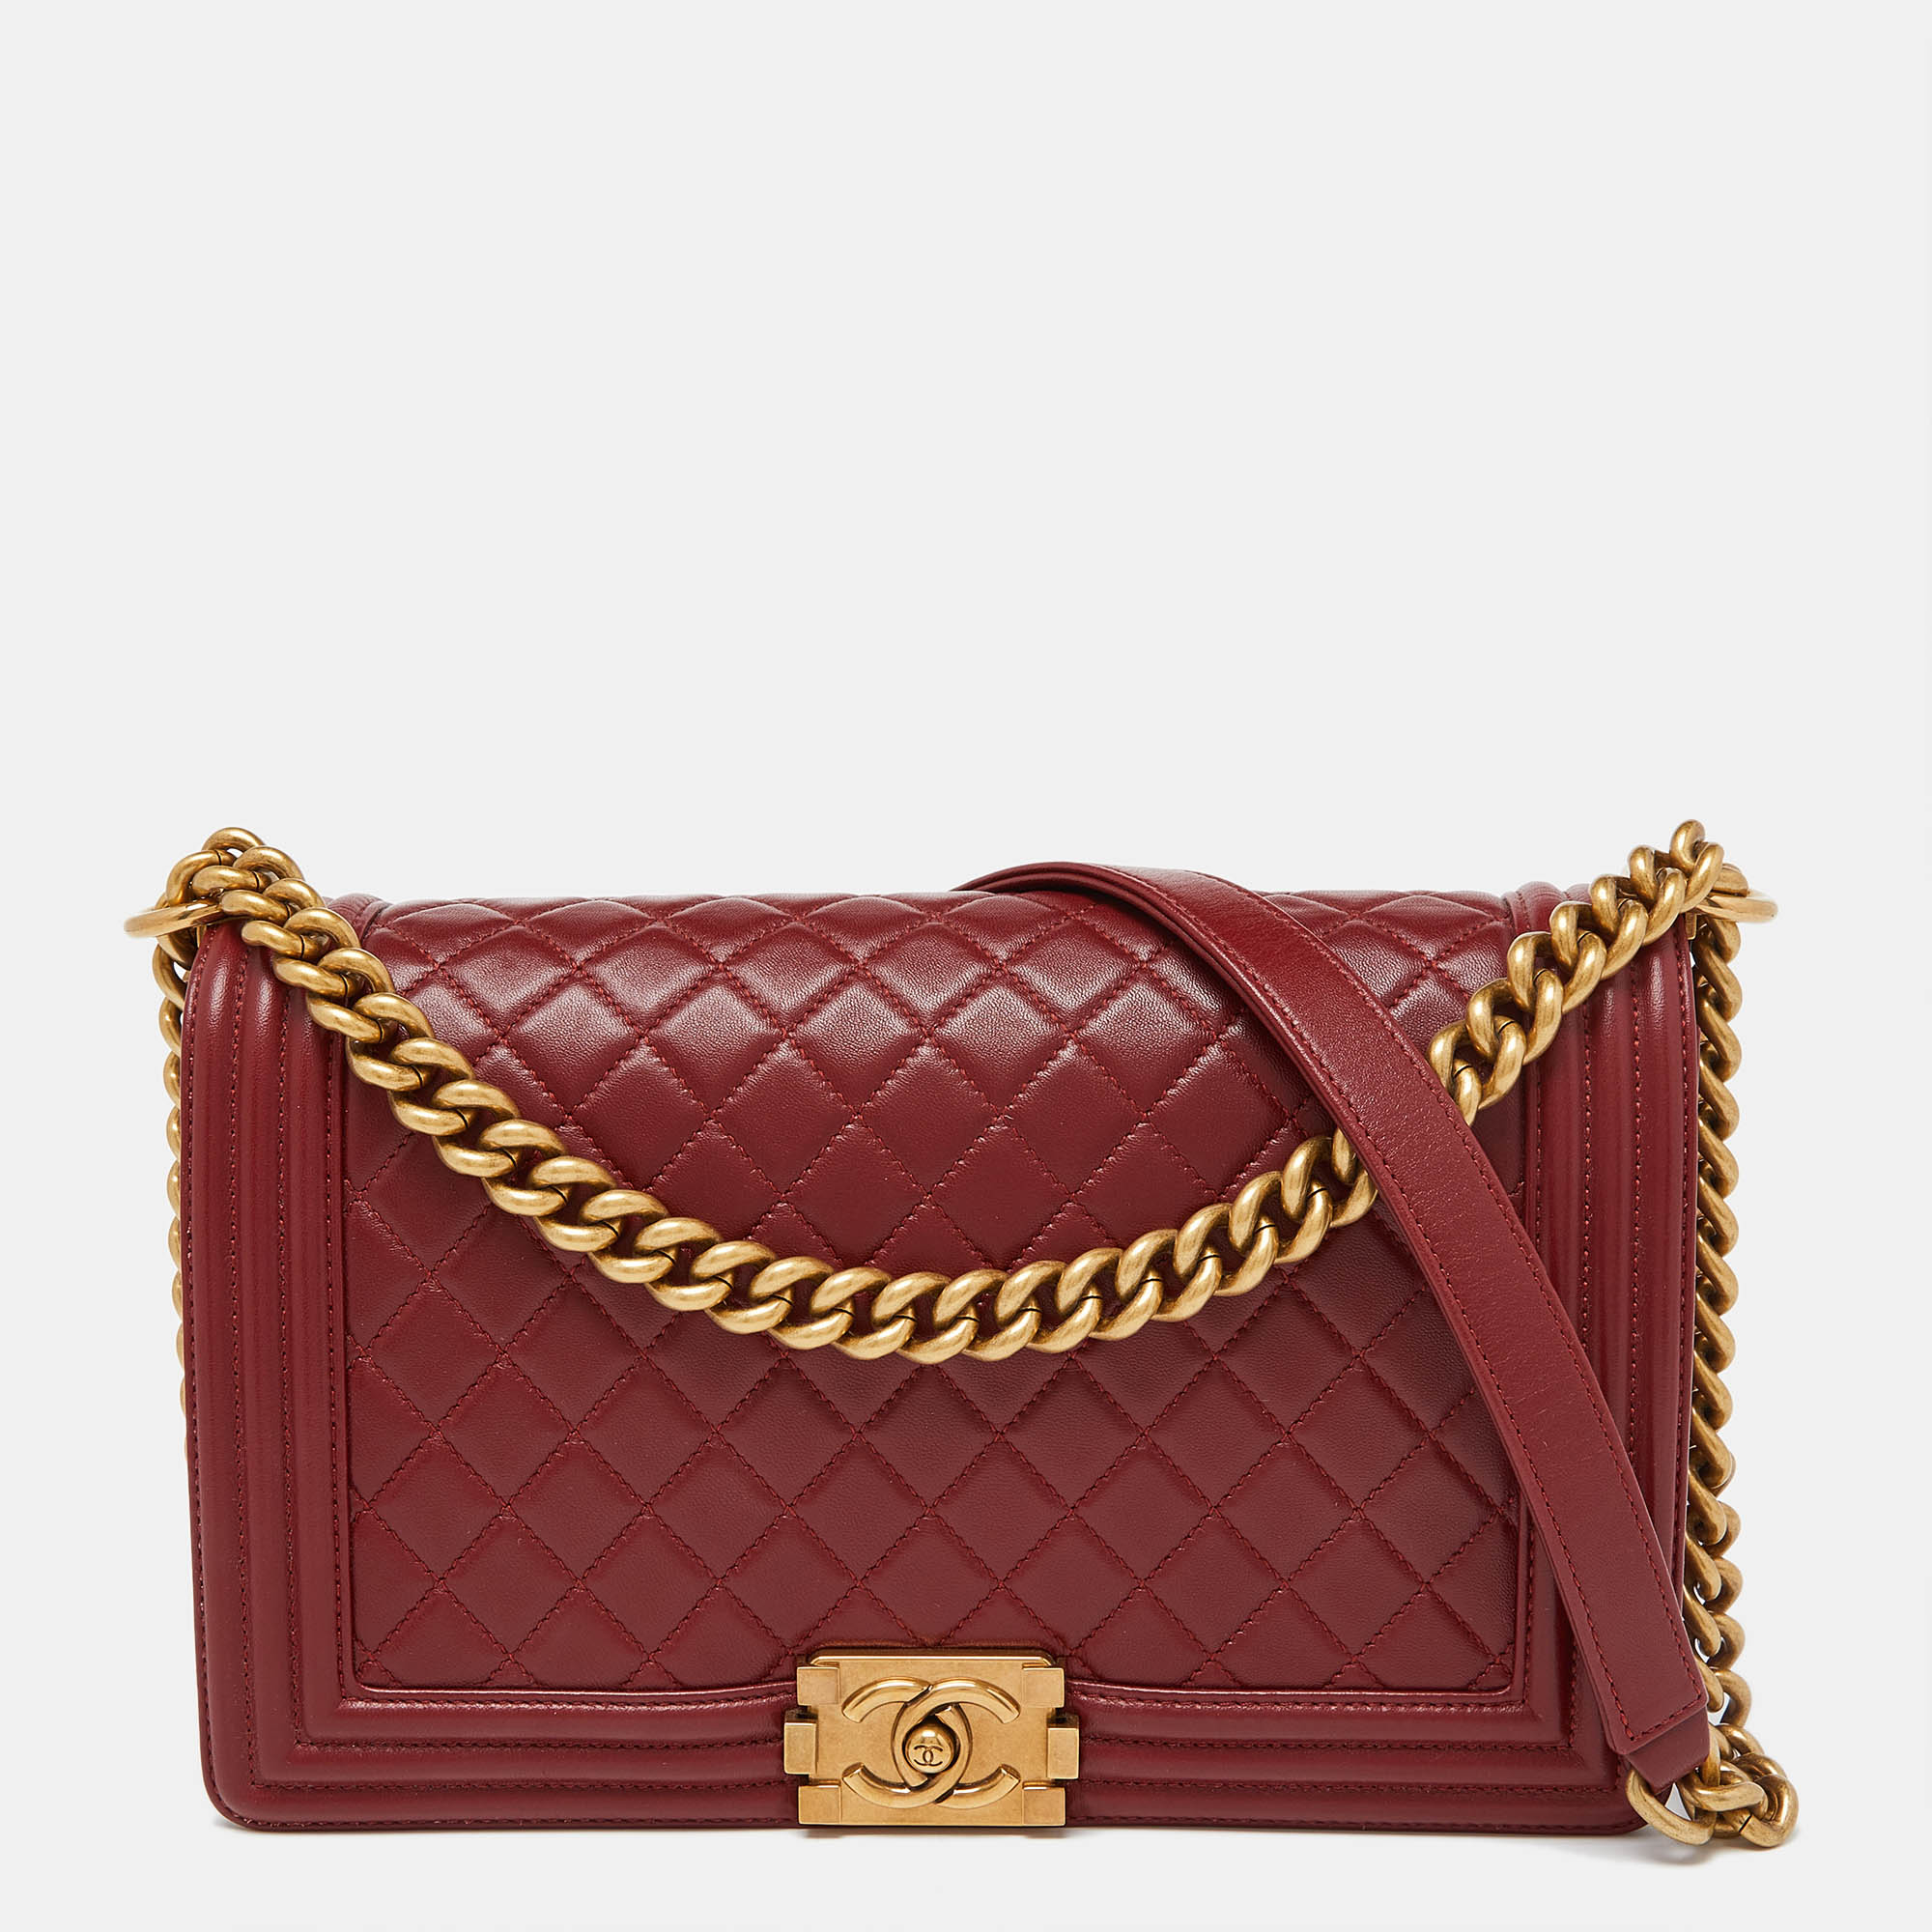 This stylish Boy flap bag from Chanel has been crafted from red leather. It opens to a capacious interior that can easily hold your everyday essentials. The bag is finished with gold tone hardware.